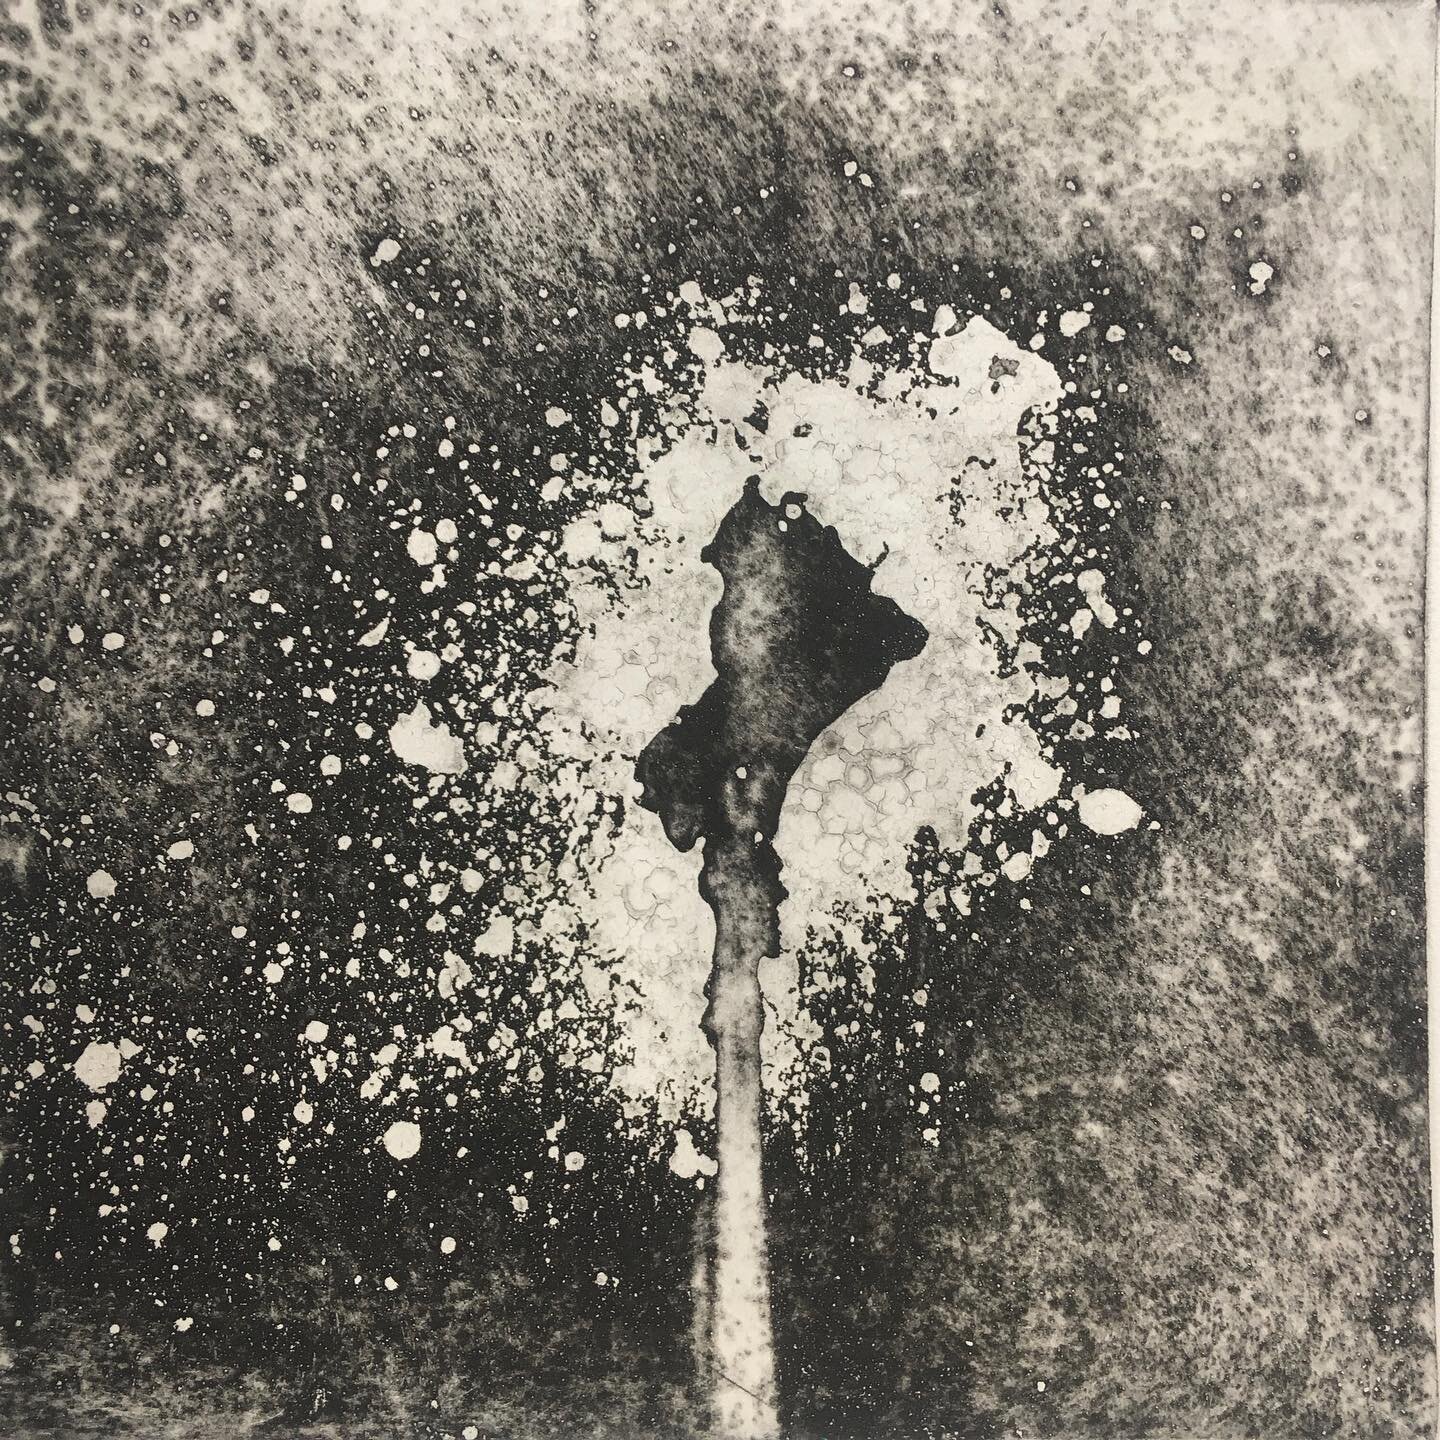 September 2020 

Alpha Particles is an early etching, which was done whilst on the MA in Printmaking at Camberwell College (UAL). I was experimenting with different materials and the etching process. Since then I have been fascinated by the dialogue 